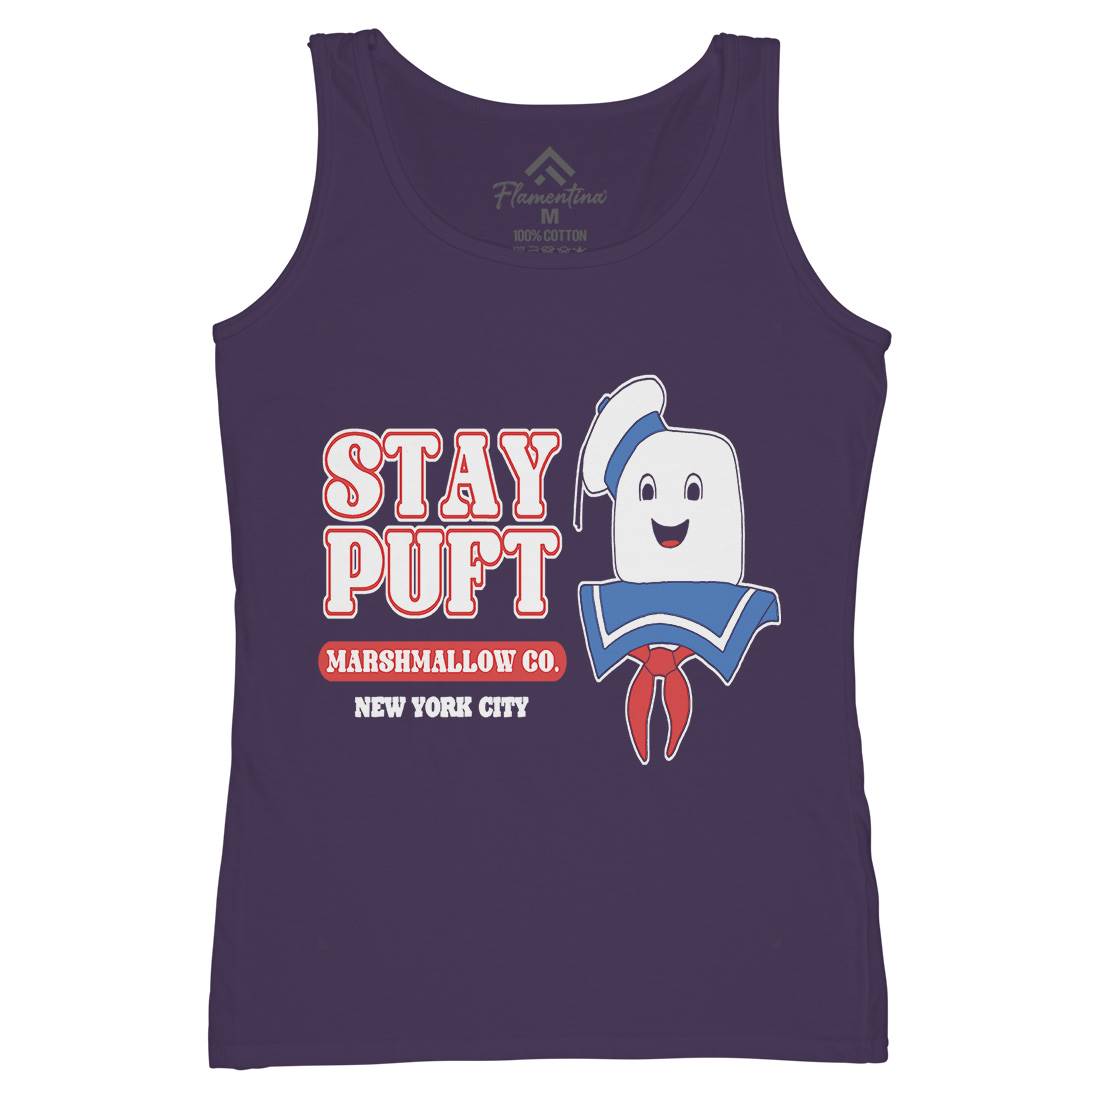 Stay Puft Co Womens Organic Tank Top Vest Space D141